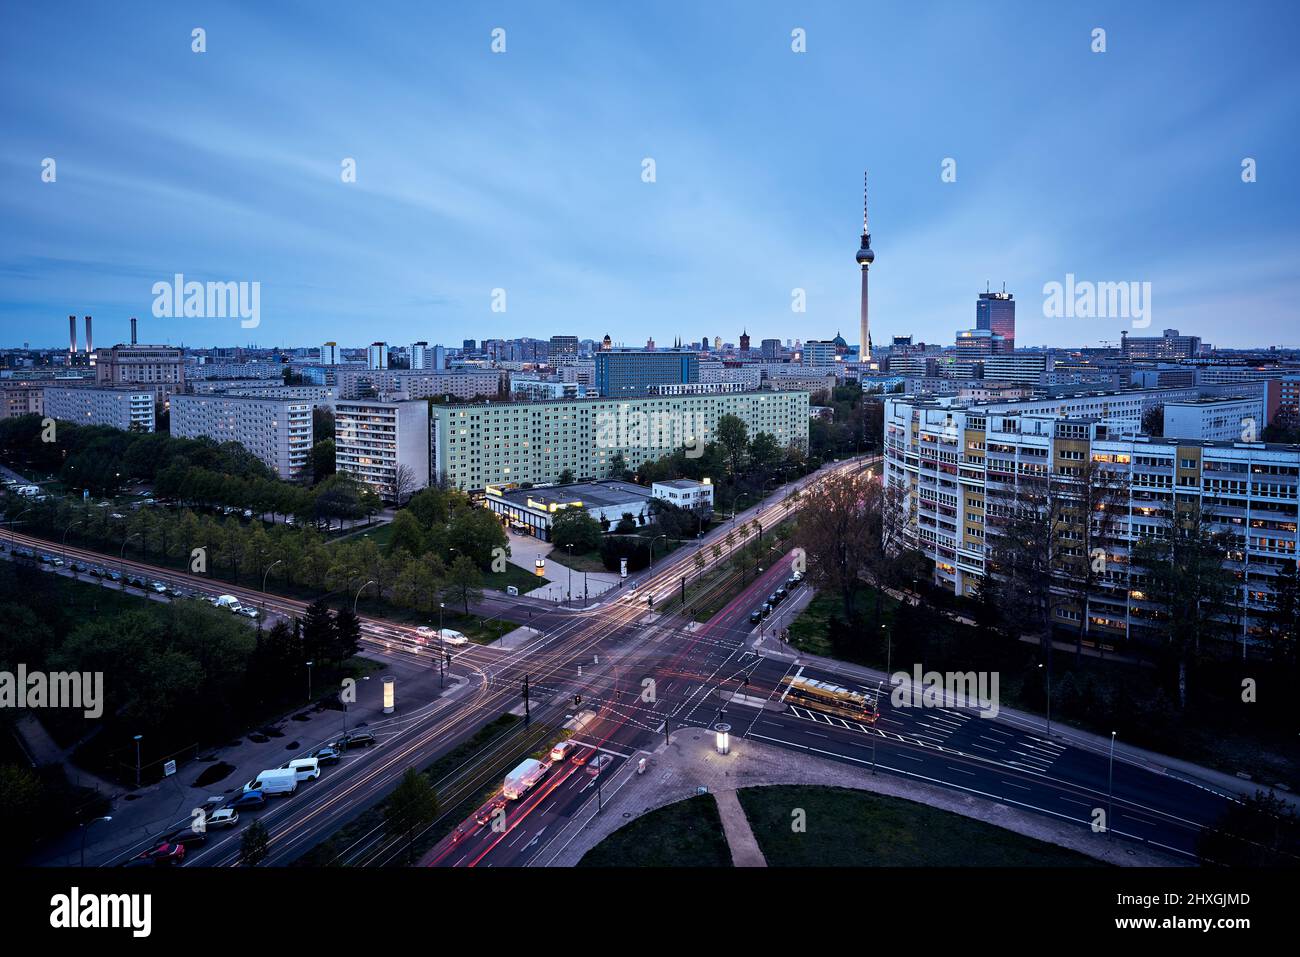 Berlin cityscape from the Place of the United Nations Stock Photo